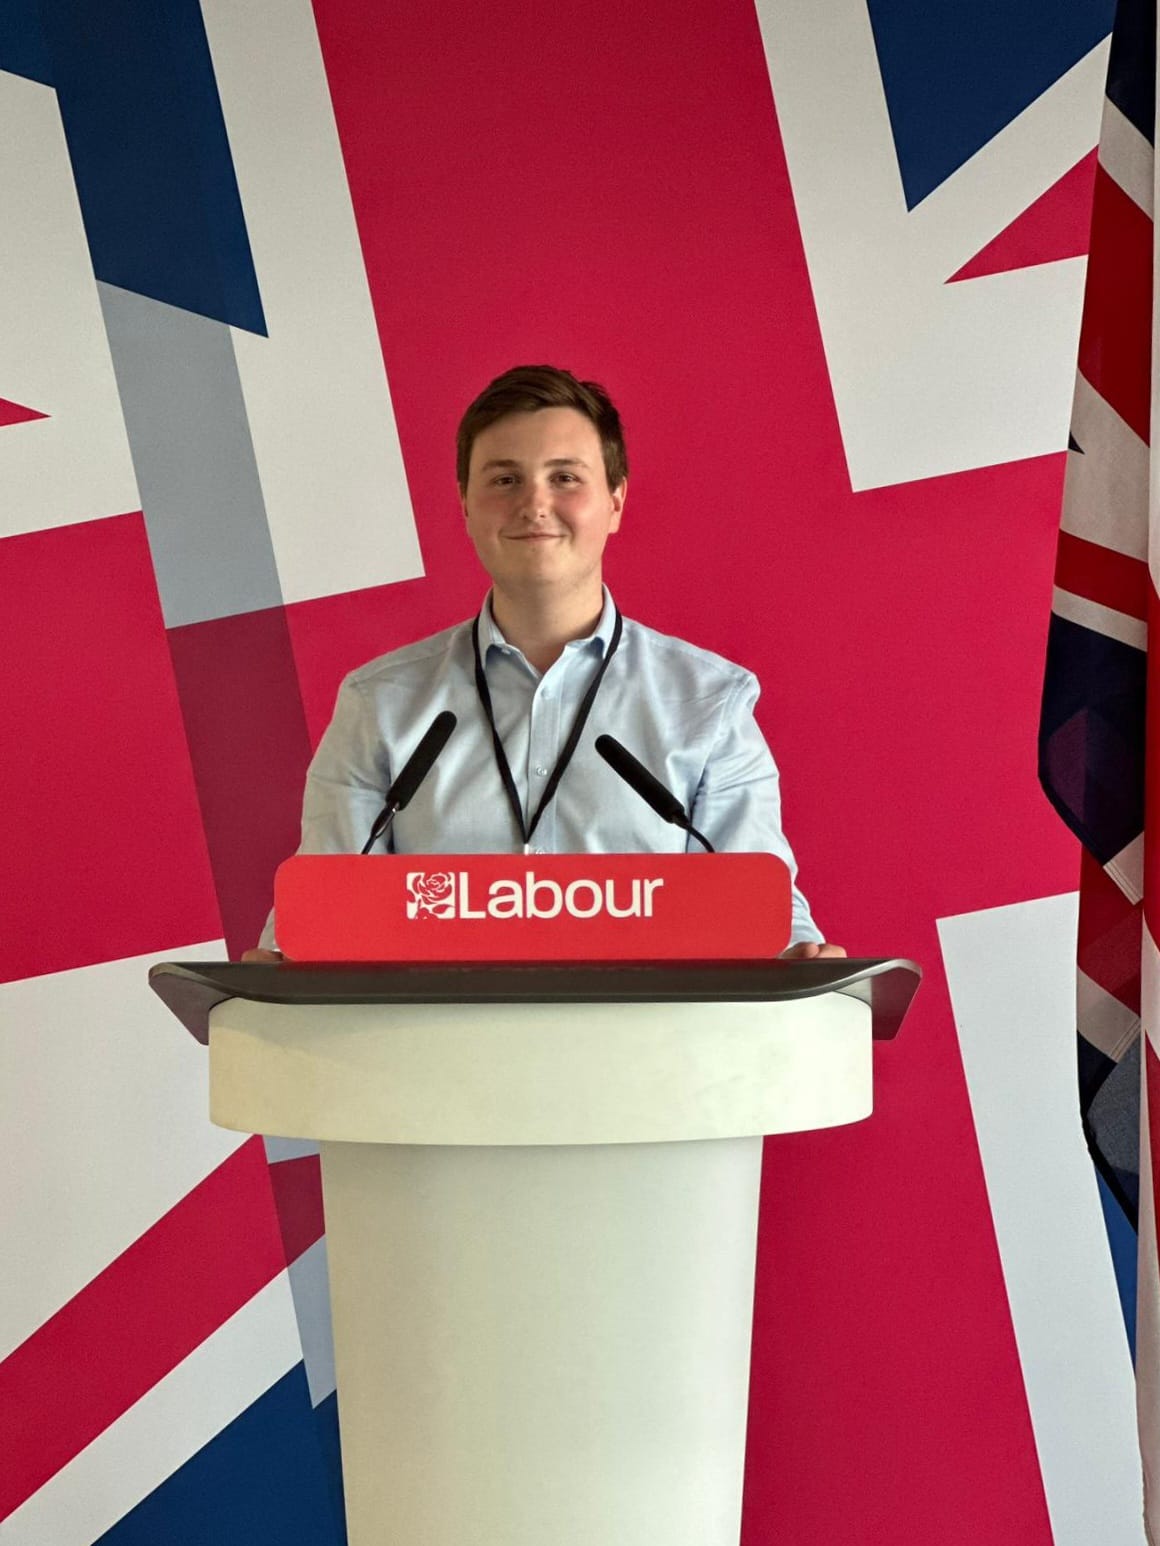 Photo of a man stood at a white podium wearing a blue shirt smiling. Podium has red sign reading "Labour". Behind the man is a backdrop with the union jack.